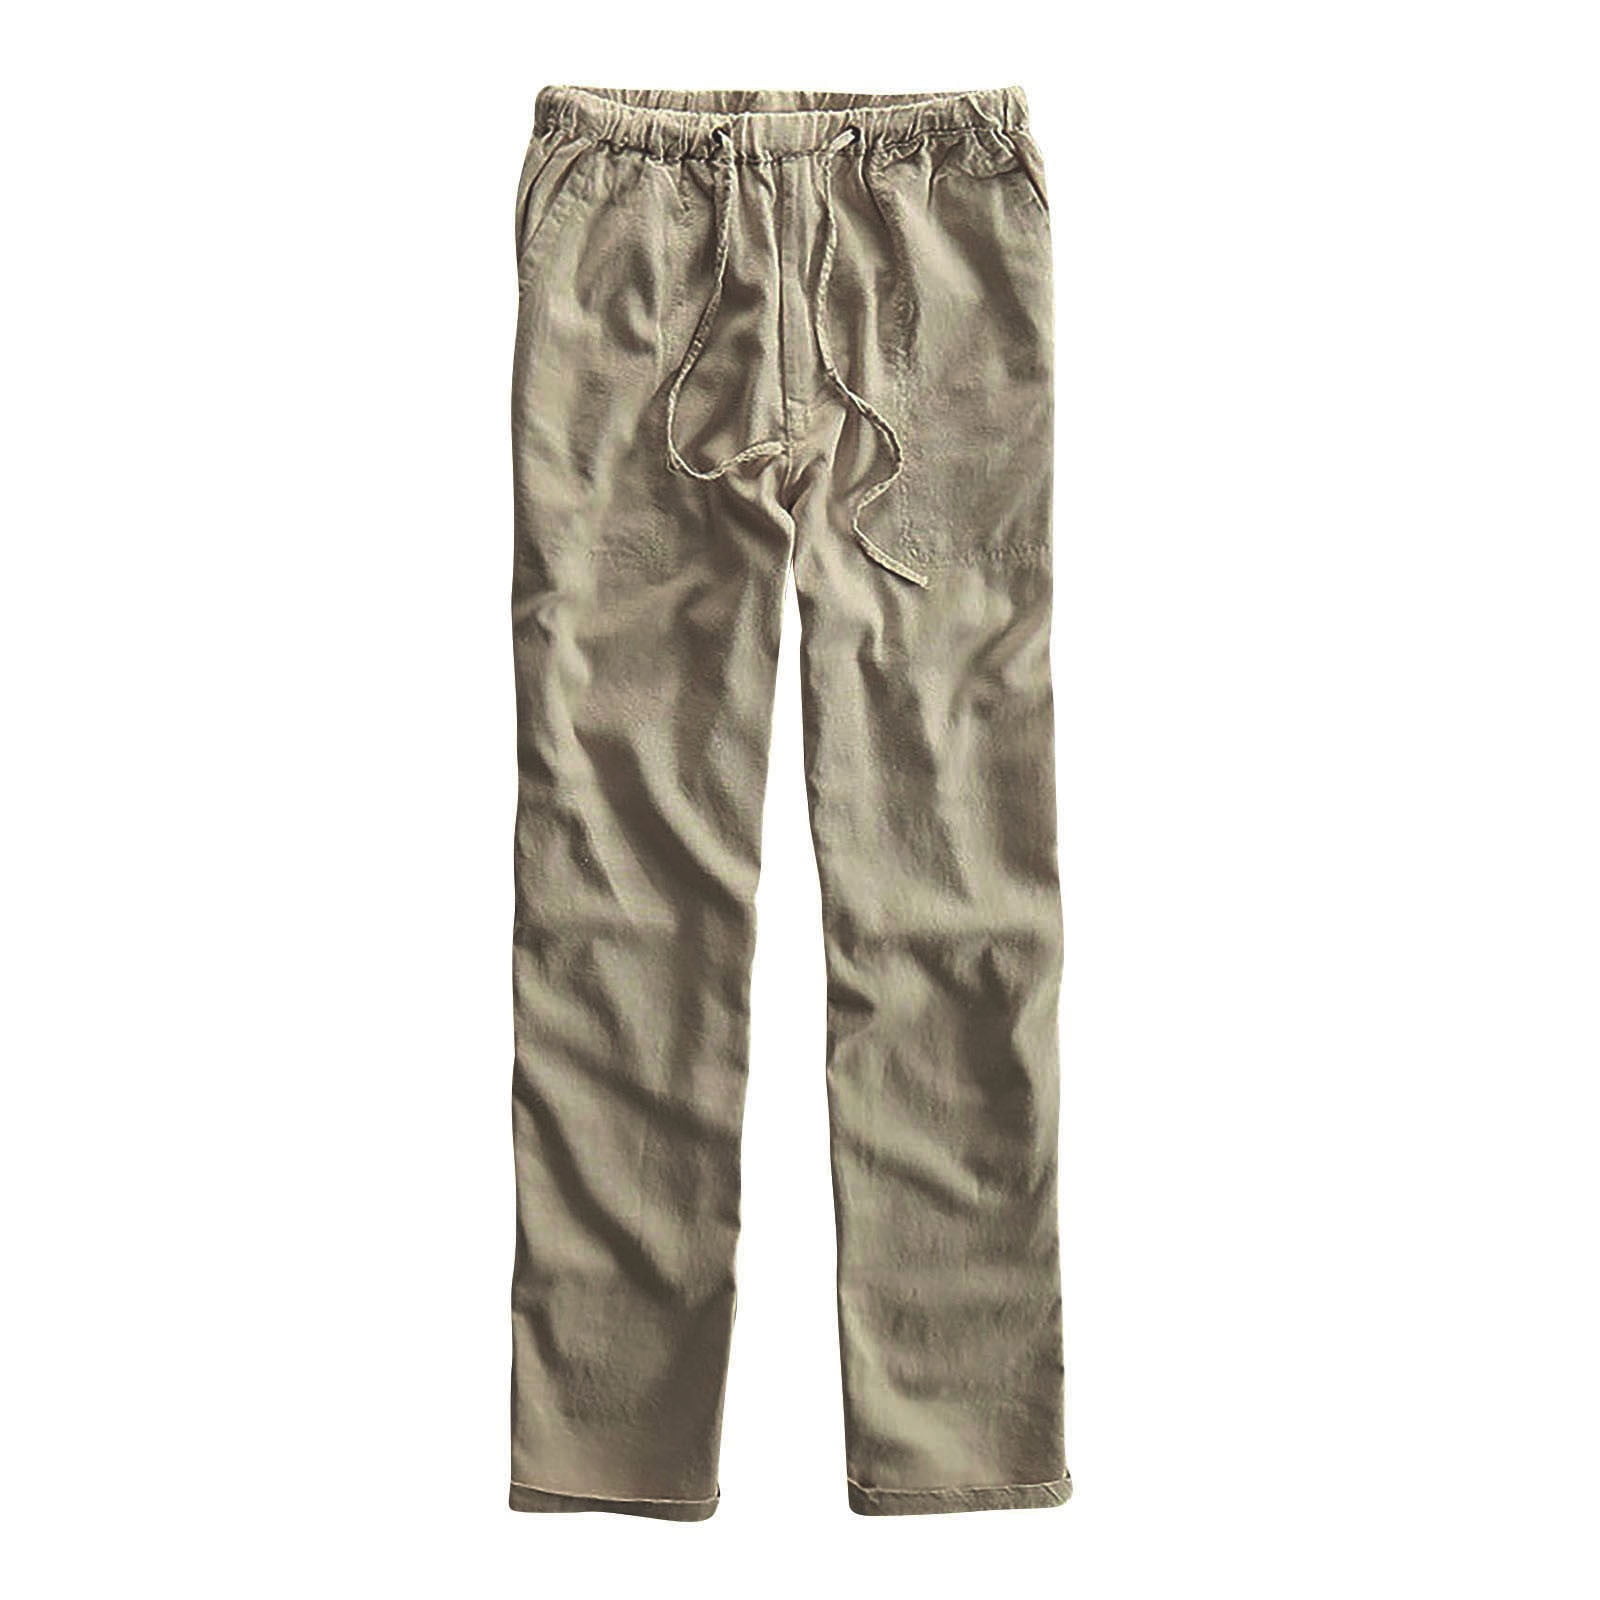 Best Men's Chino Pants For Sale – GINGTTO